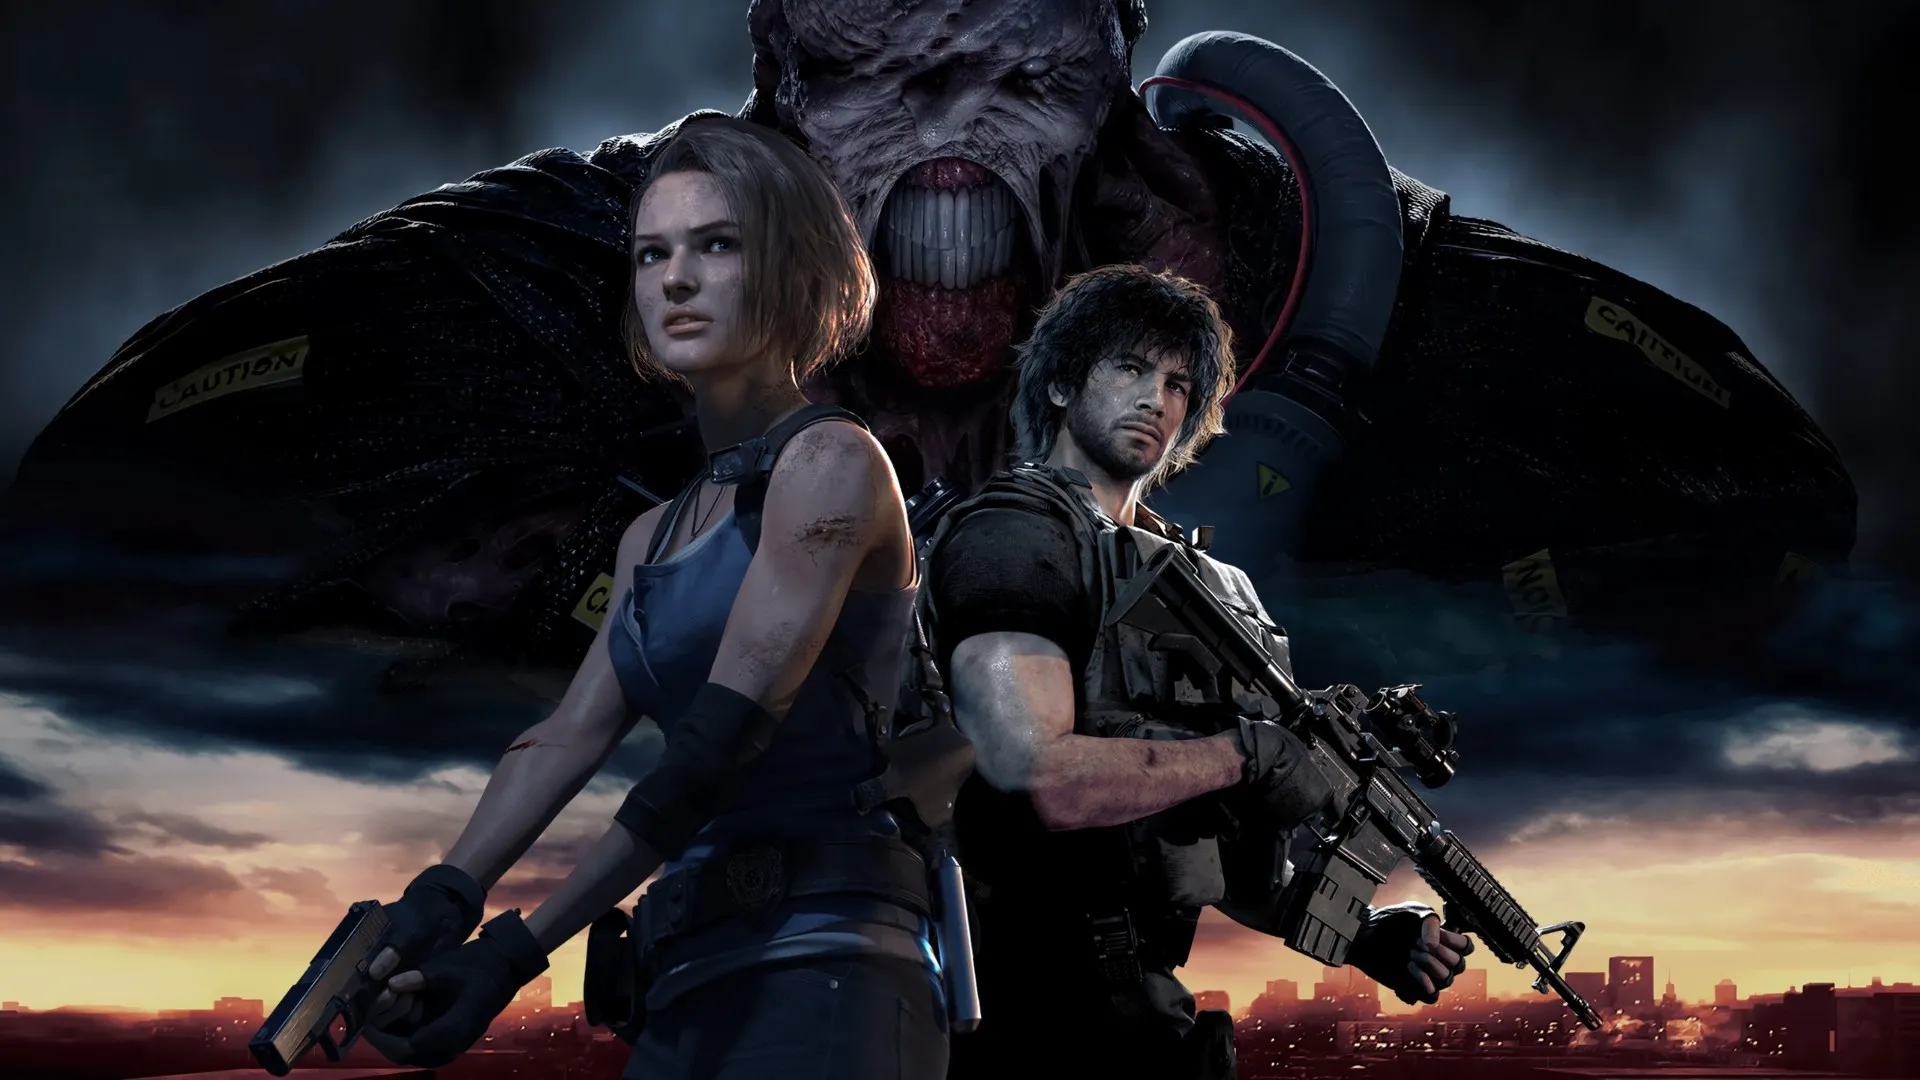 Resident Evil 3 Remake reviews - What are the critics saying